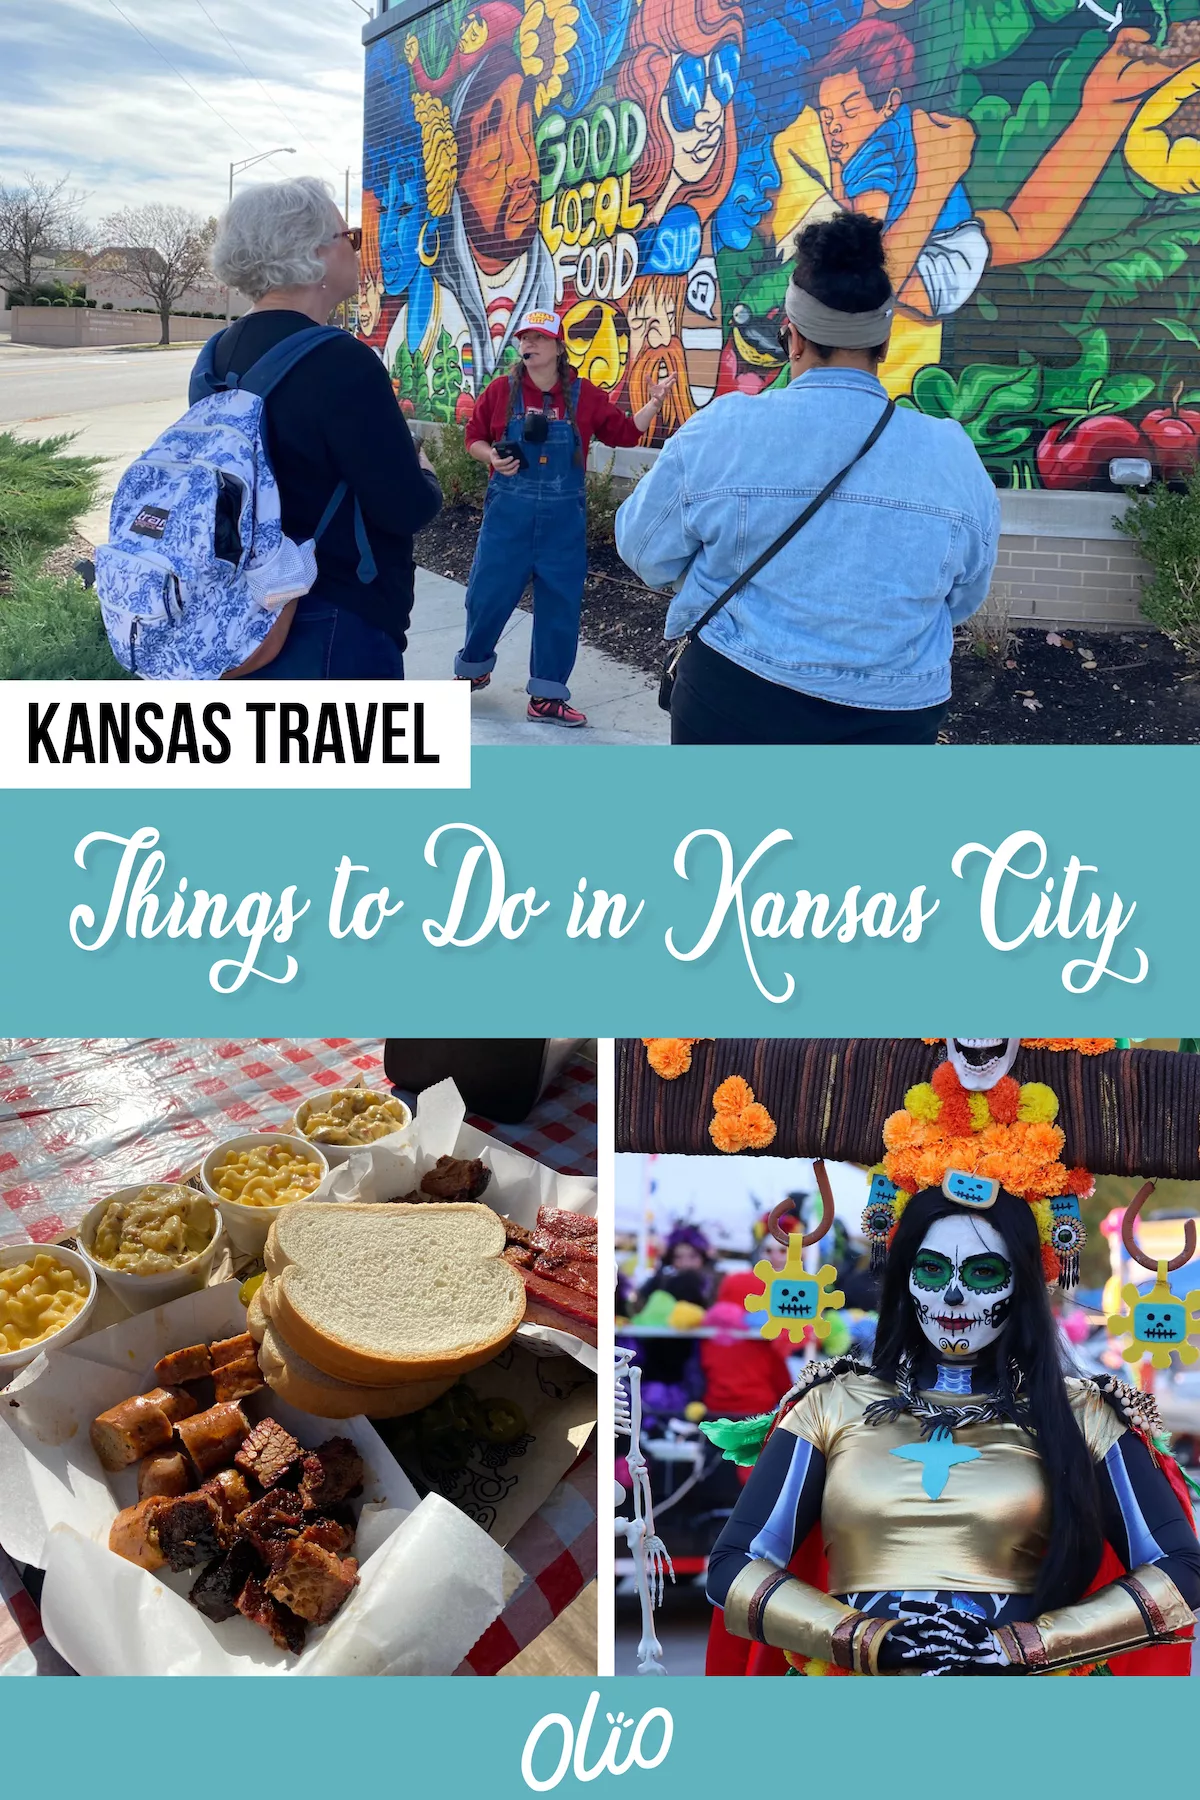 From epic eateries and culinary trails to vibrant local history and celebrations, discover seven things to do in Kansas City, KS to celebrate the community’s unique culture. Whether you’re planning a weekend getaway or crossing over from Missouri for the afternoon, there are plenty of reasons to delve into this community’s hidden gems. Eat your way through the KCK Taco Trail, take a hike with Urban Hikes KC and so much more.